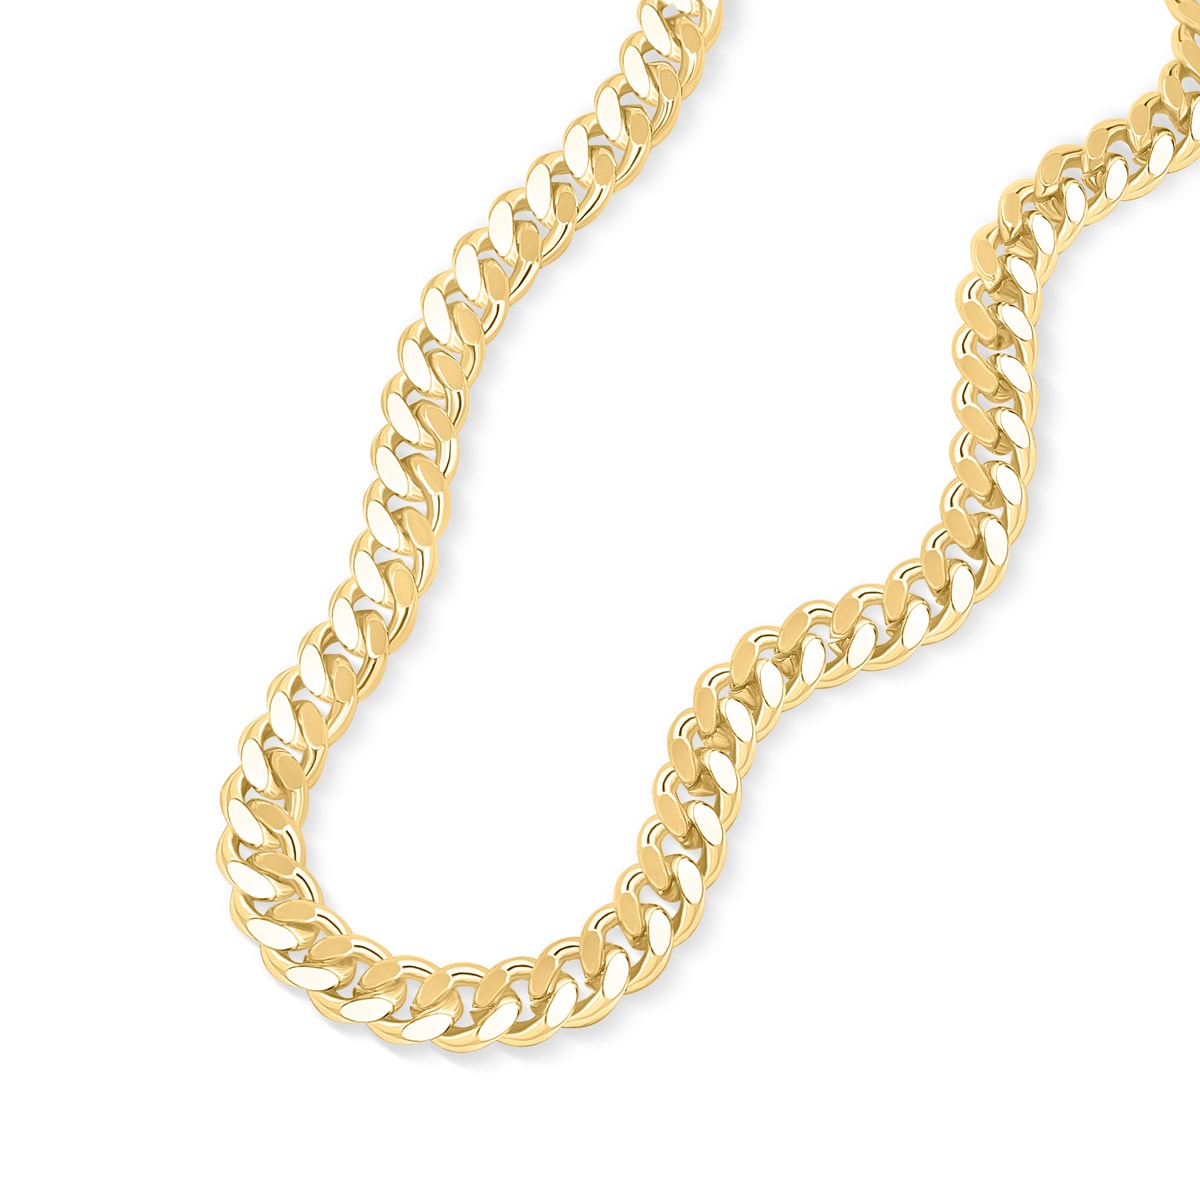 Thick affordable gold necklace